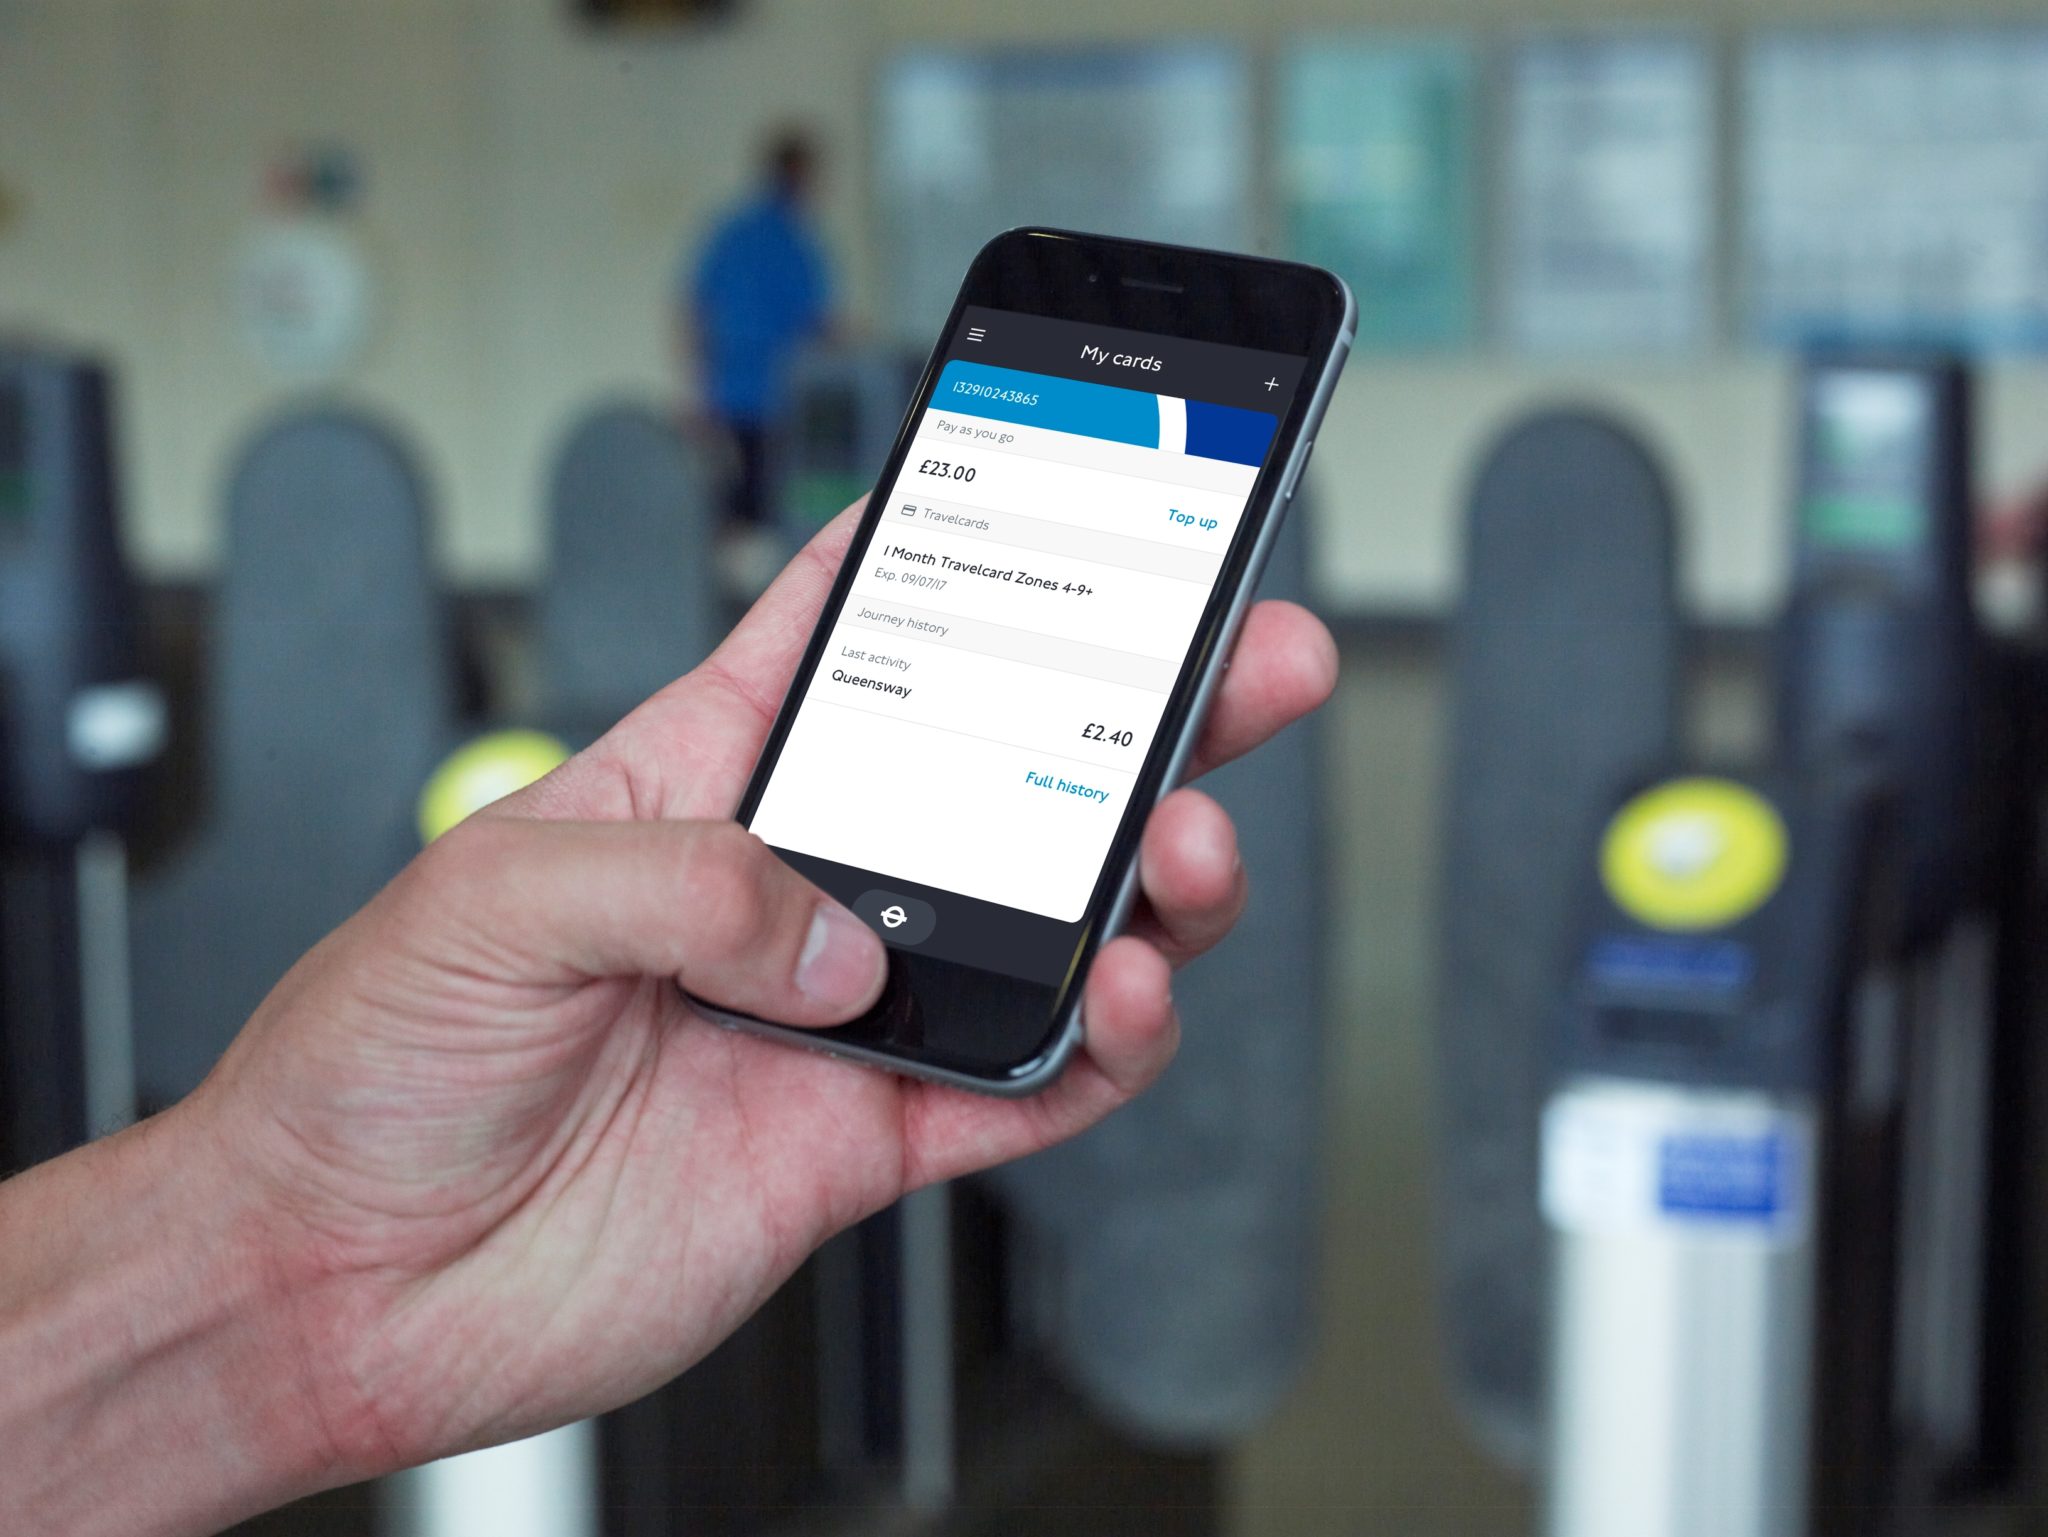 The world is your Oyster: TFL and Cubic create smartphone top up app